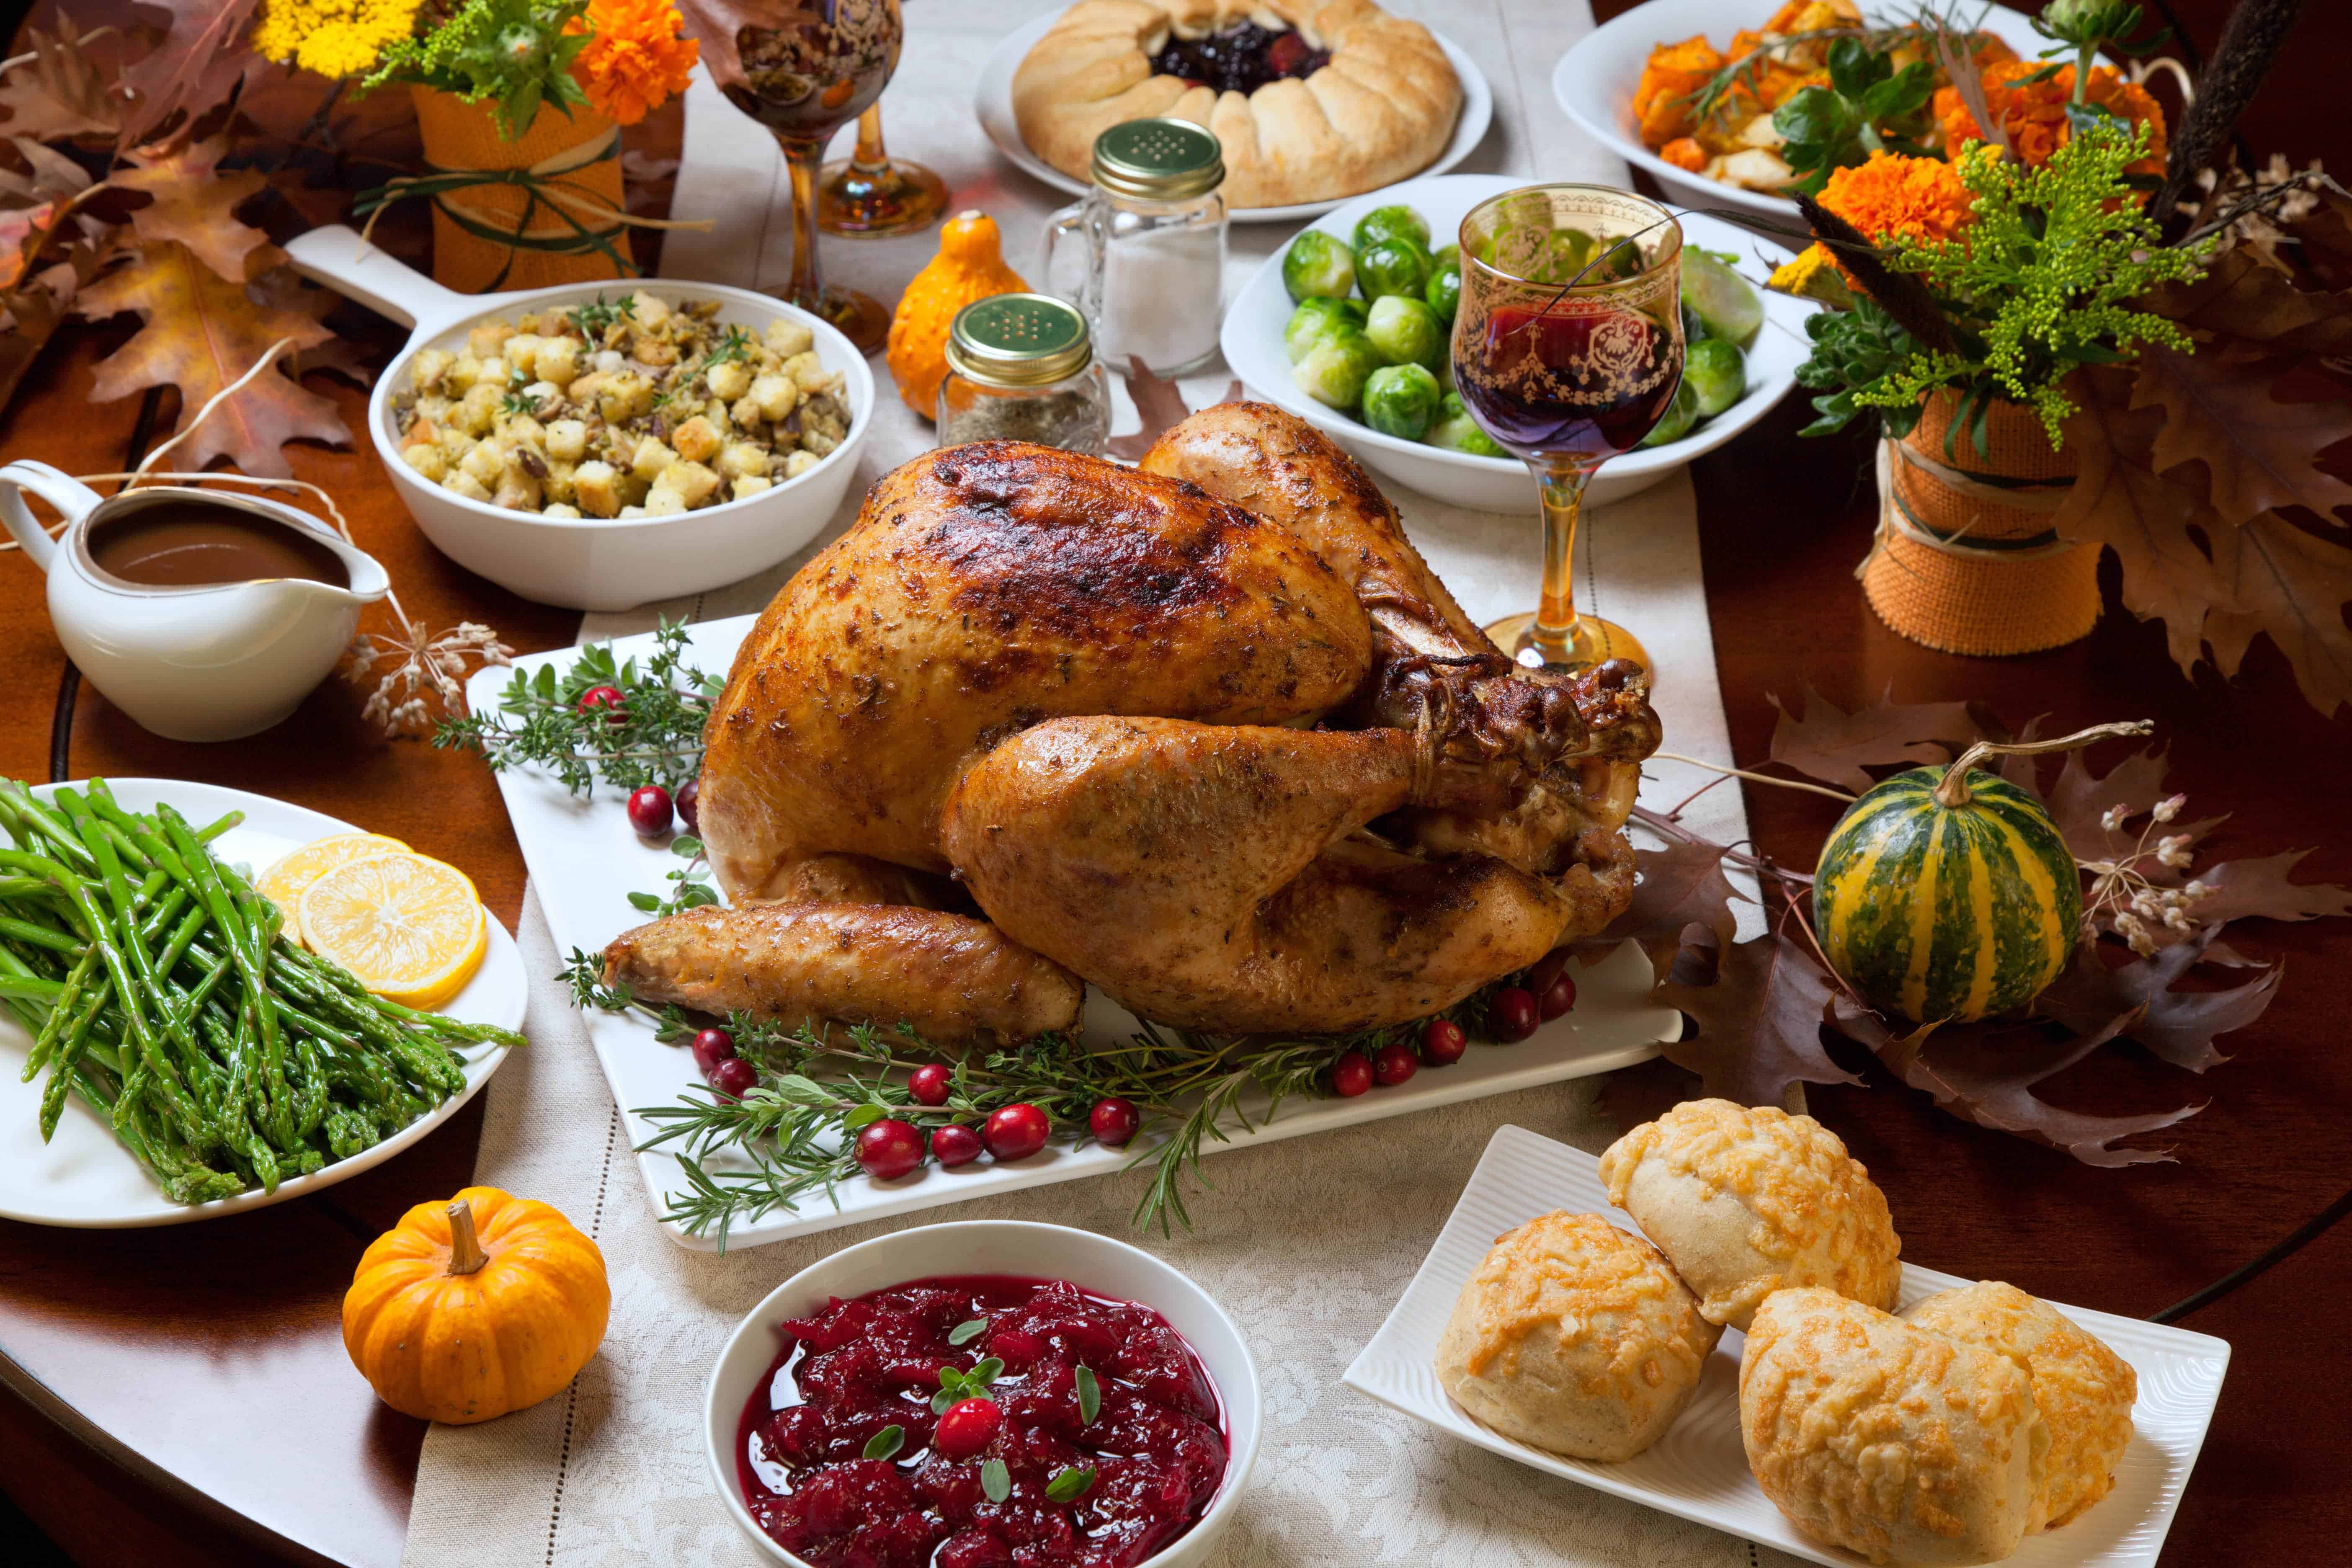 Use our hosting Thanksgiving checklist and healthy holiday eating tips to help eliminate stress. Grab the list at Made In A Pinch and follow us on Pinterest